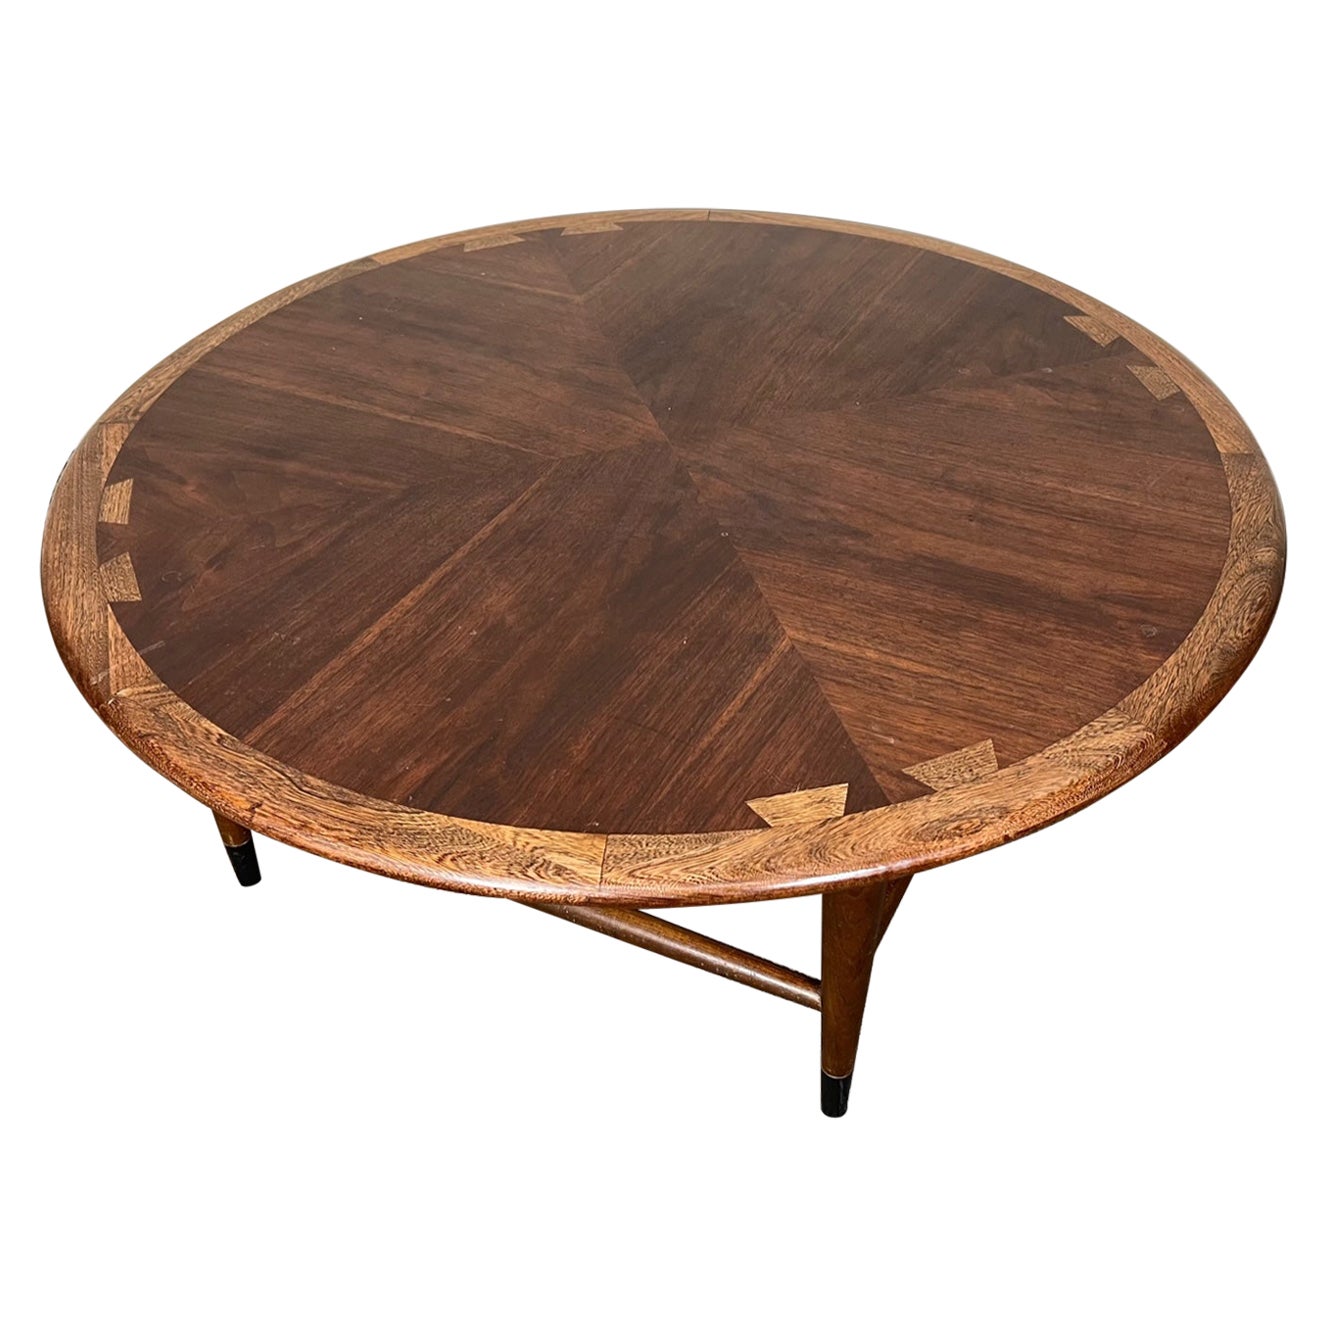 Mid-Century Modern Round Coffee Table by Lane Acclaim Dove Tail